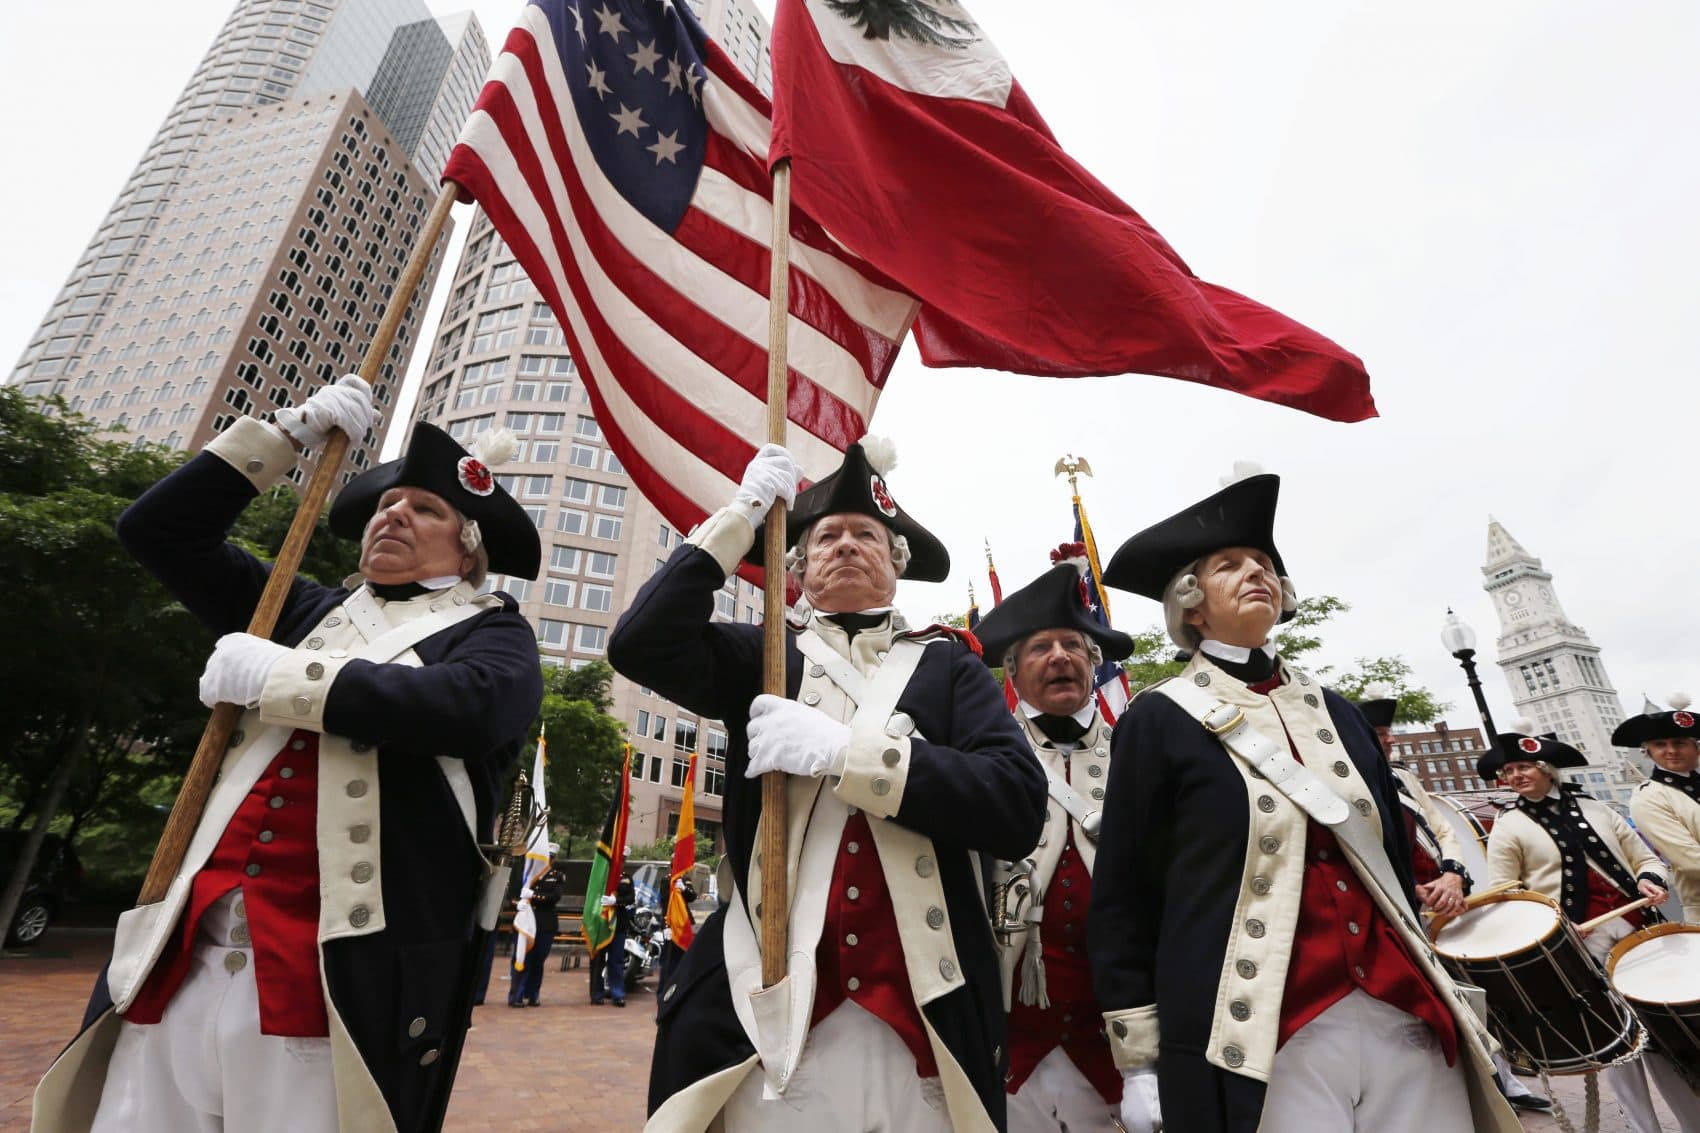 The Middlesex County Volunteers prepare to march during ceremonies for the Sail Boston tall ships event on Friday, June 16, 2017, in Boston. (Michael Dwyer/AP)